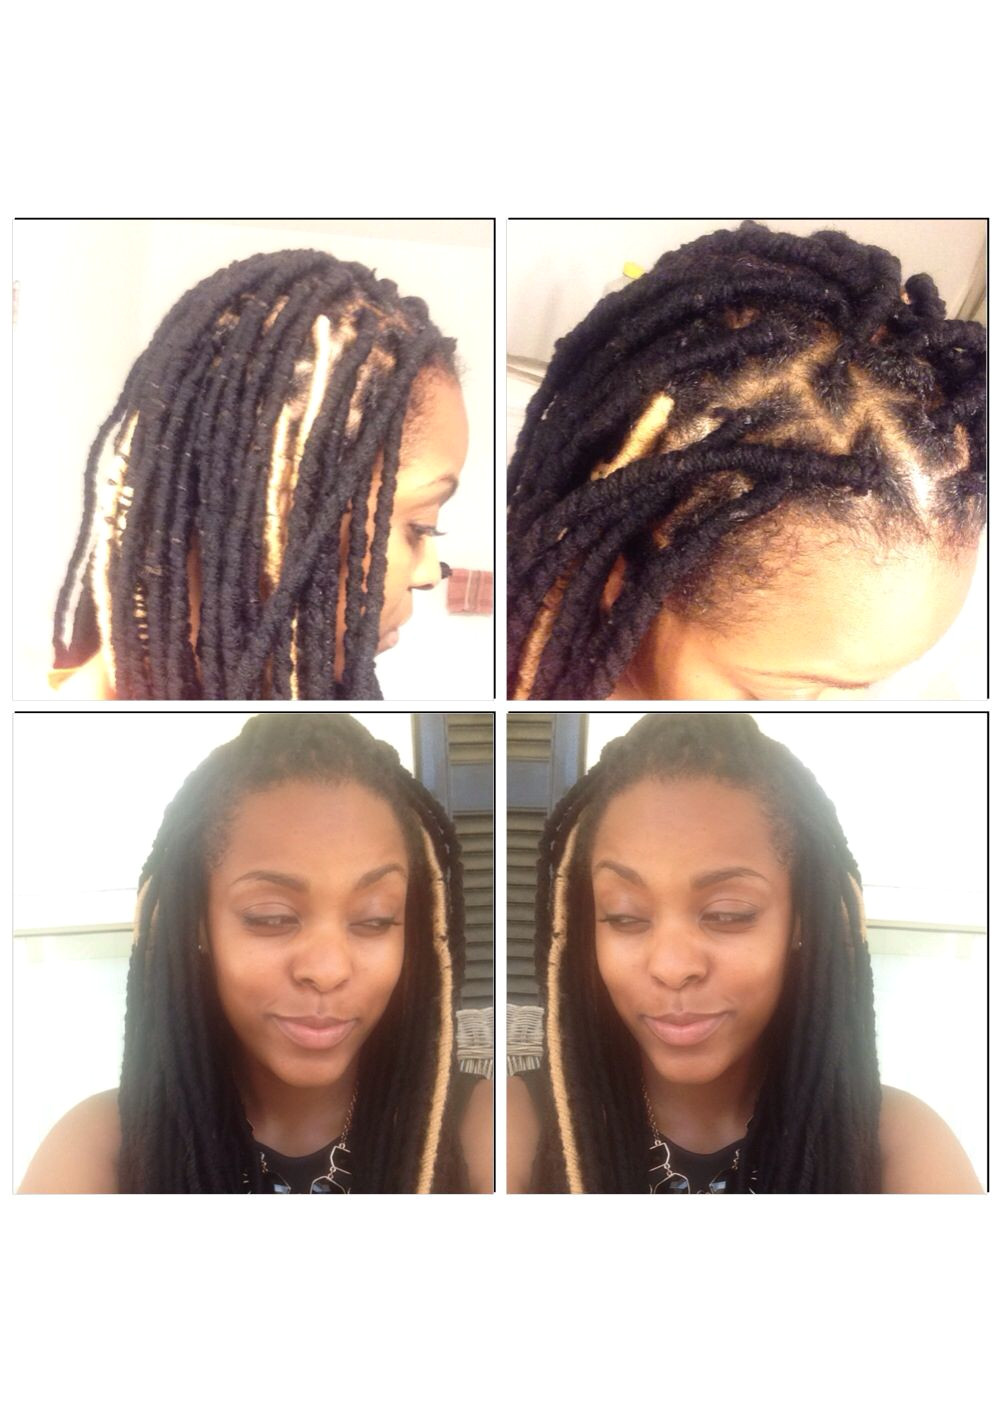 Simple Yarn Hairstyles Yarn Dreads My Protective Style Easy and Simple Braid with 3